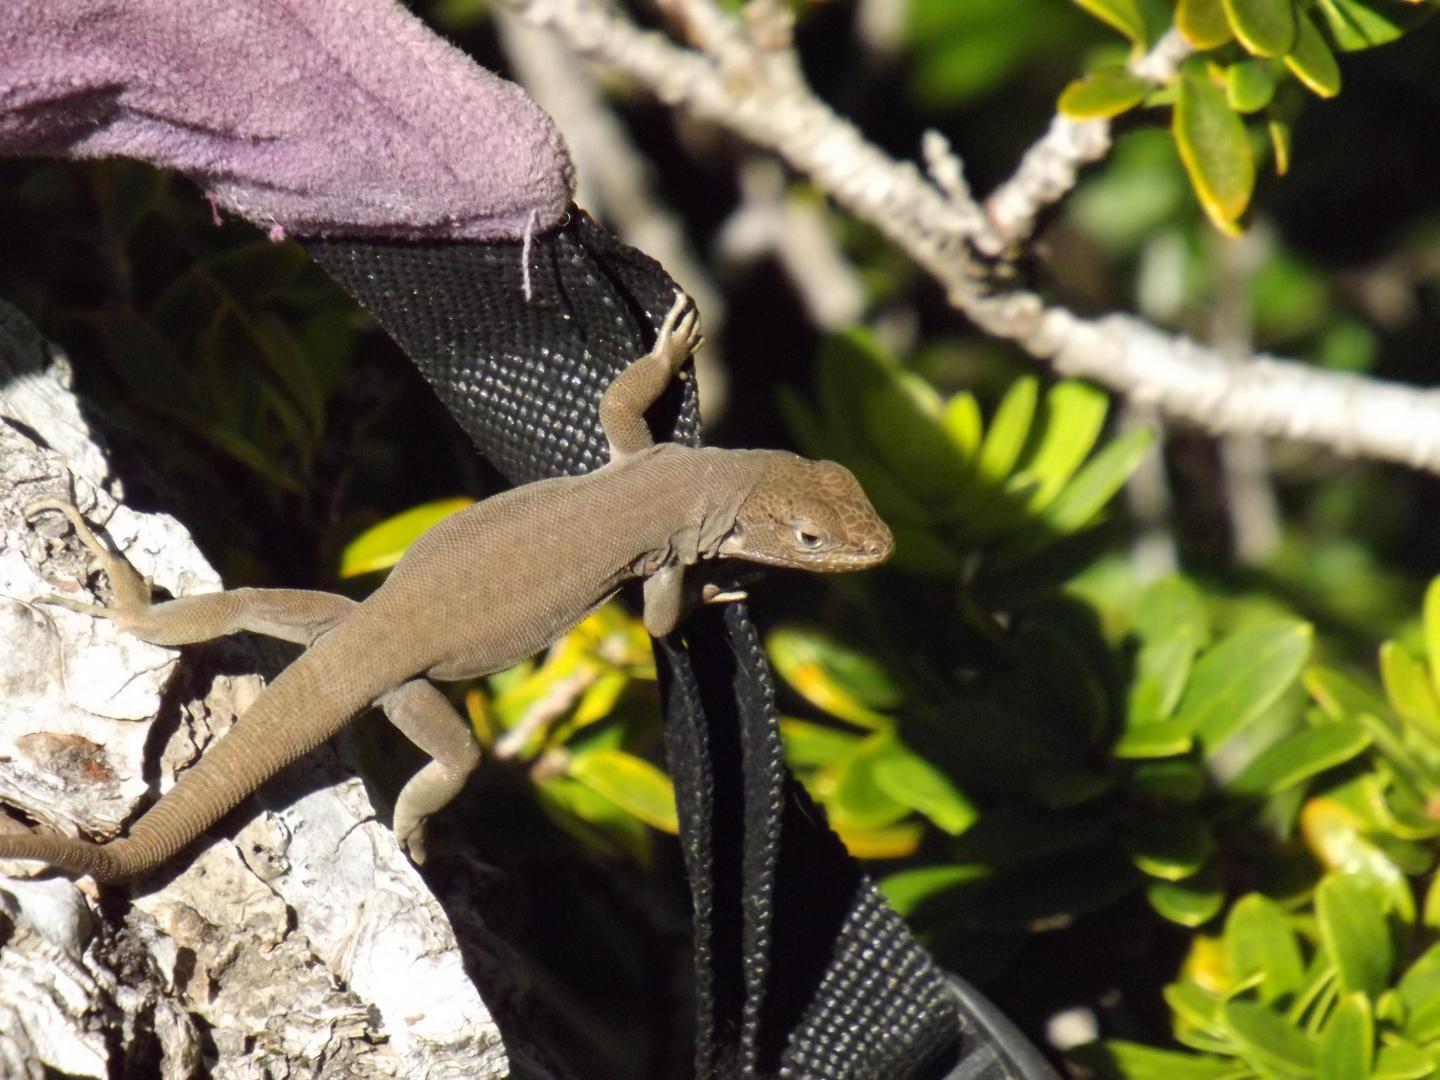 A Janequeo`s Lizard Climbed on One of the Researcher's Backpack during the Fieldwork